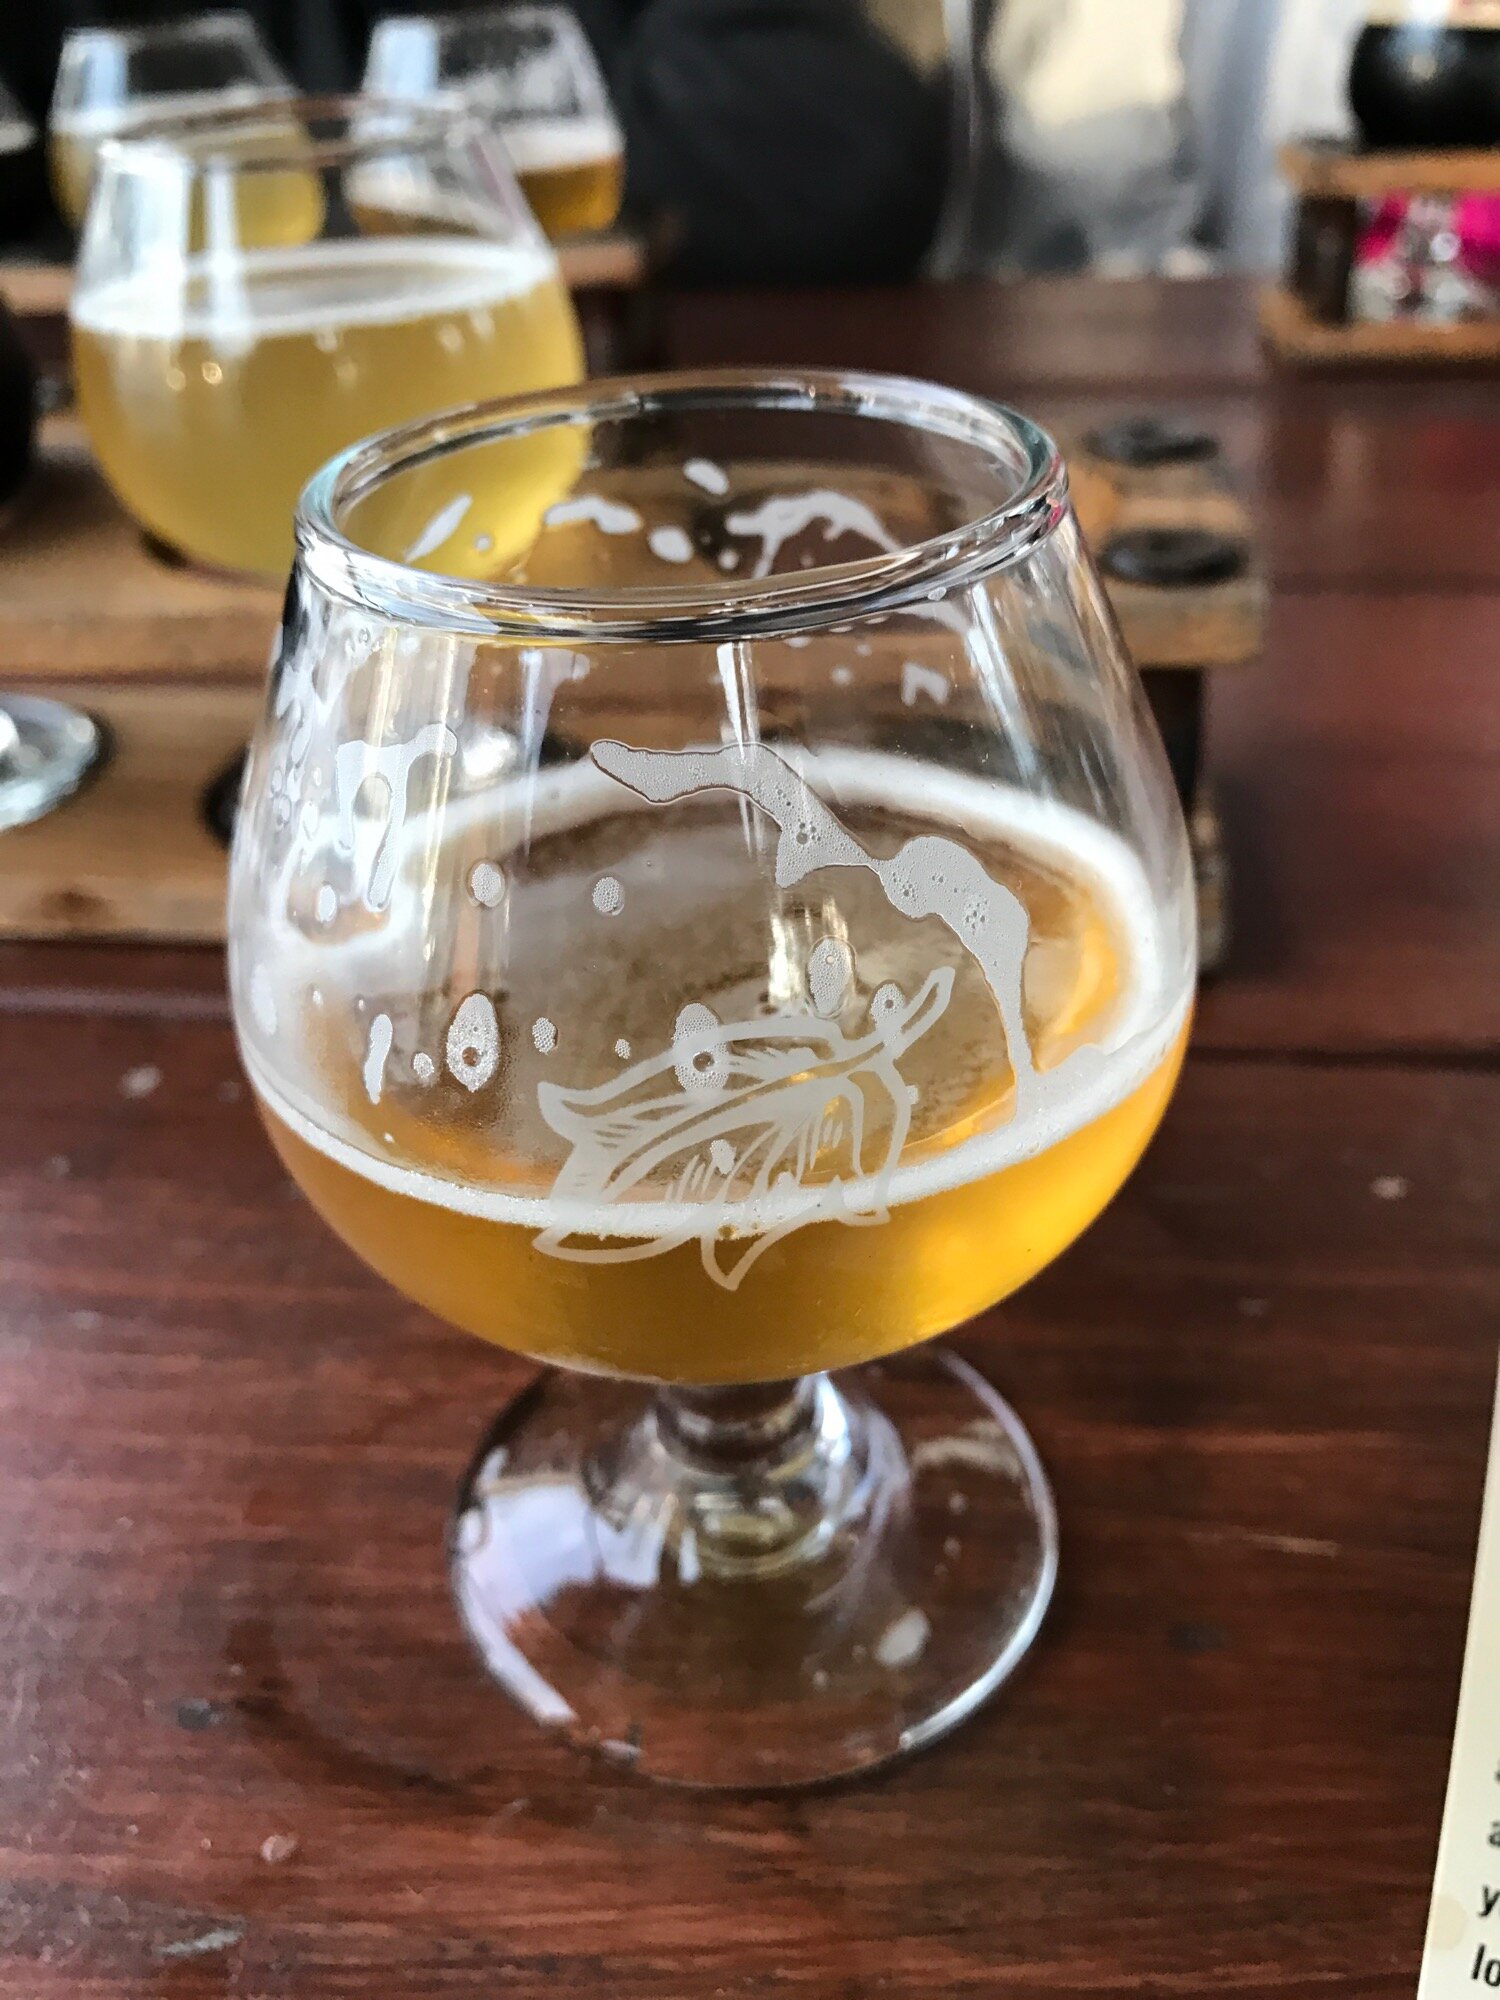 A glass of amber colored beer